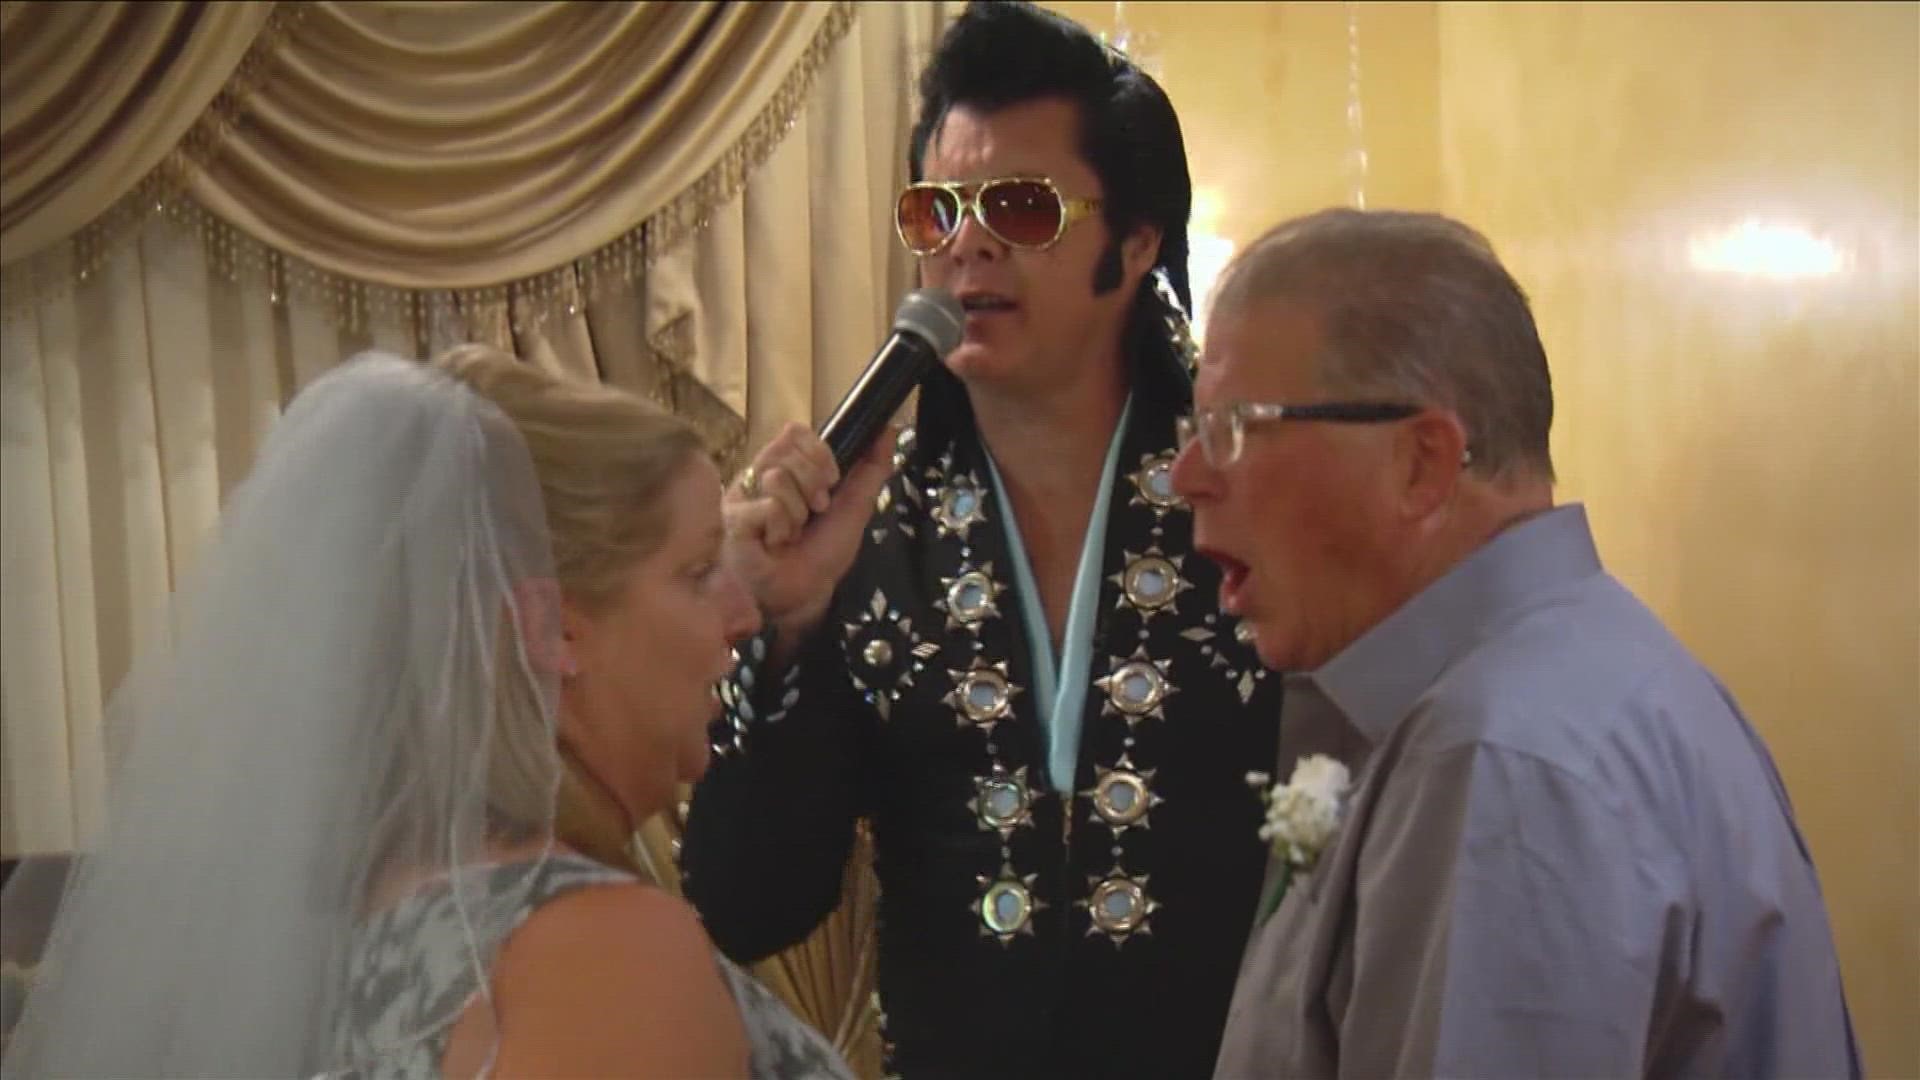 The city's wedding industry generates $2 billion a year, and officials say Elvis-themed weddings are a big part of that.